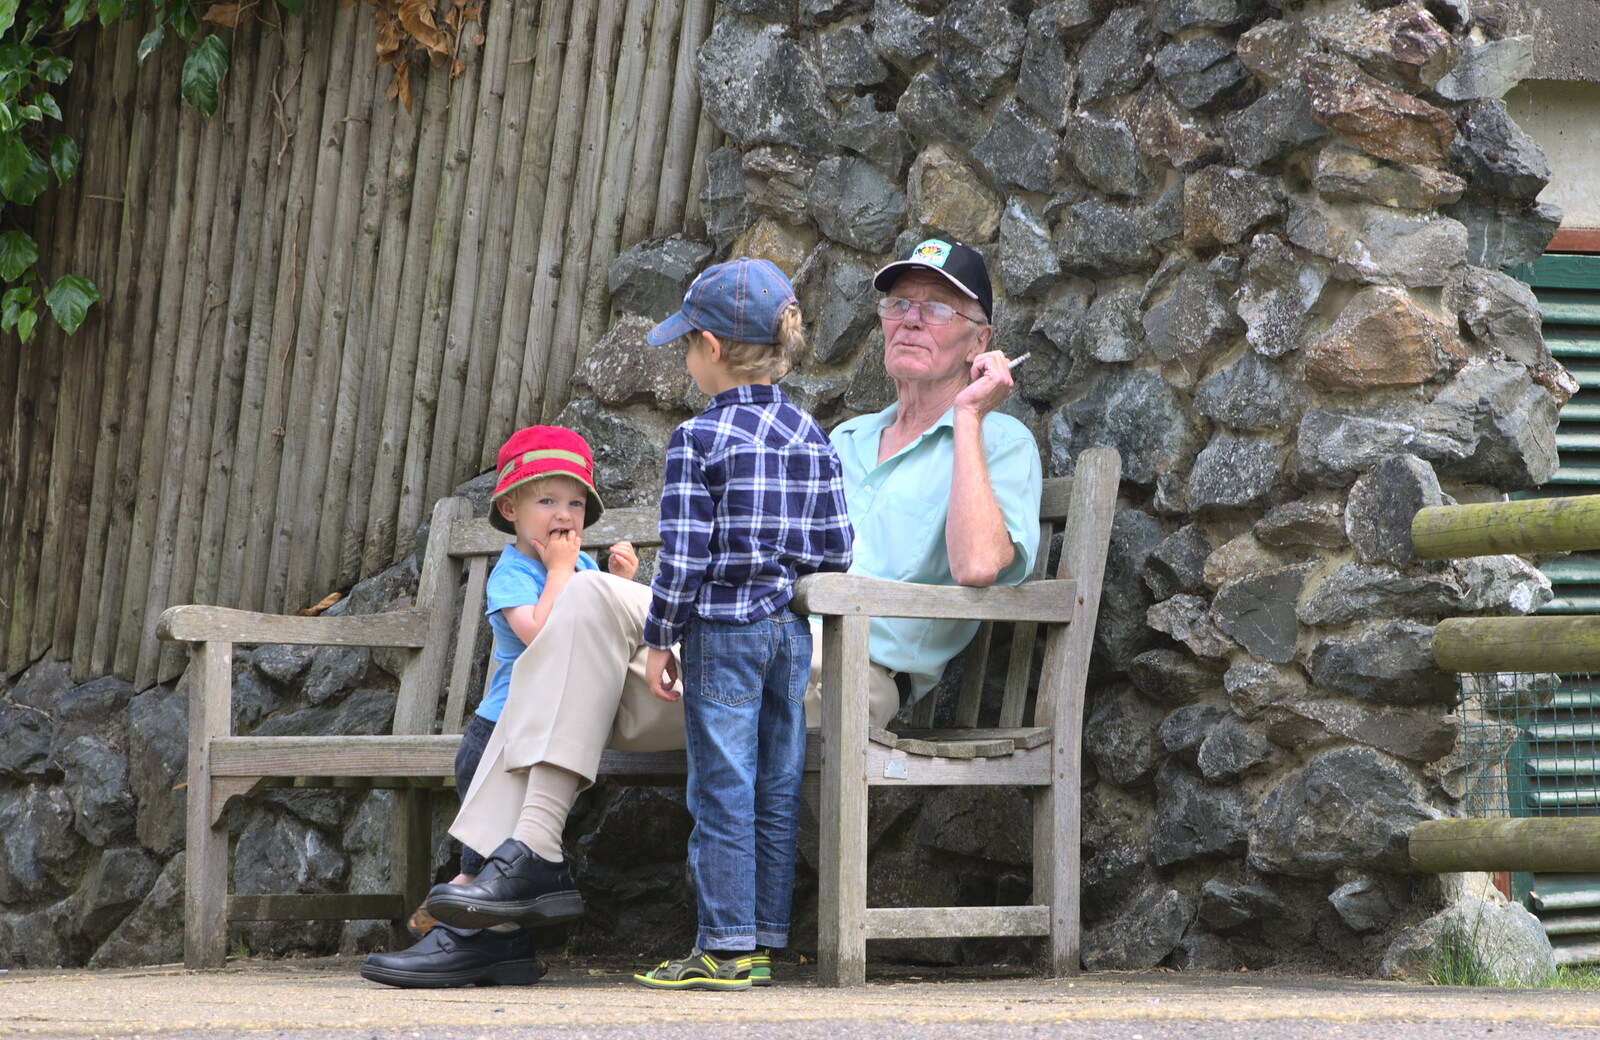 A Birthday Trip to the Zoo, Banham, Norfolk - 26th May 2014: Grandad's got a fag on as the boys hang around